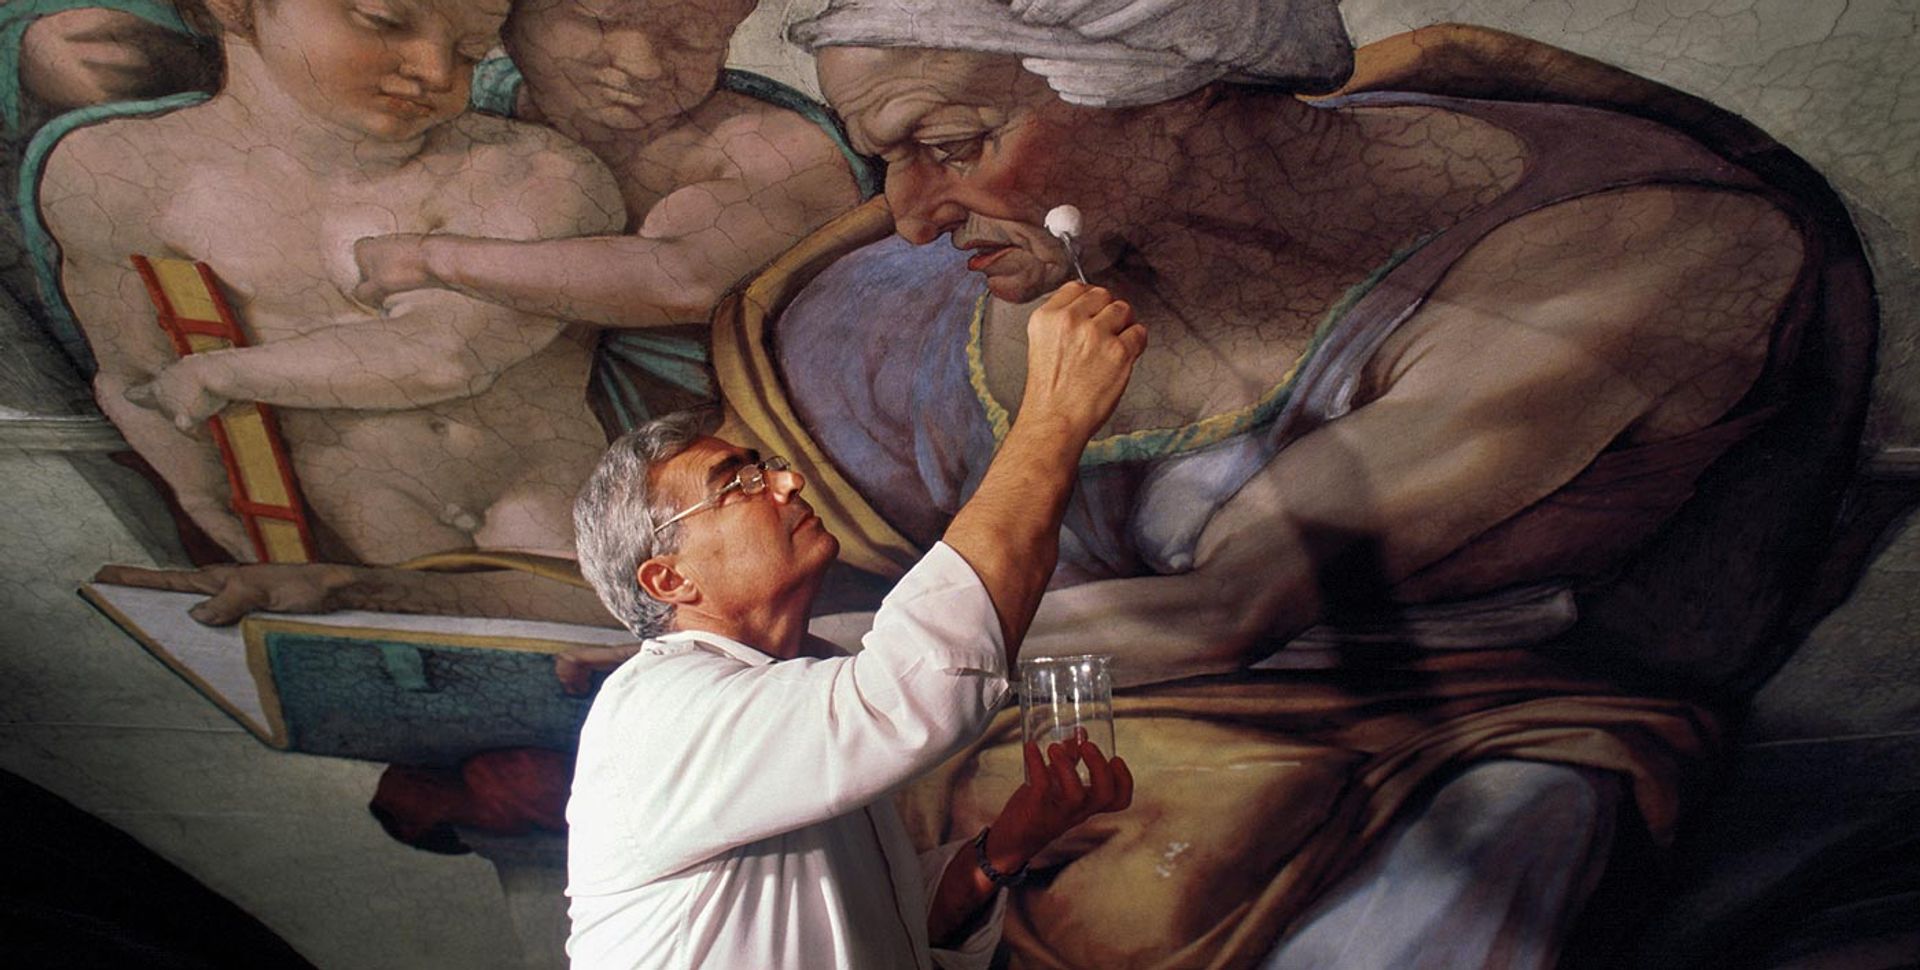 Gianluigi Colalucci works on the Cumaean Sibyl during the restoration of Michelangelo’s  vaulted ceiling of the Sistine Chapel in January 1987 Gianni Giansanti/Gamma-Rapho via Getty Images